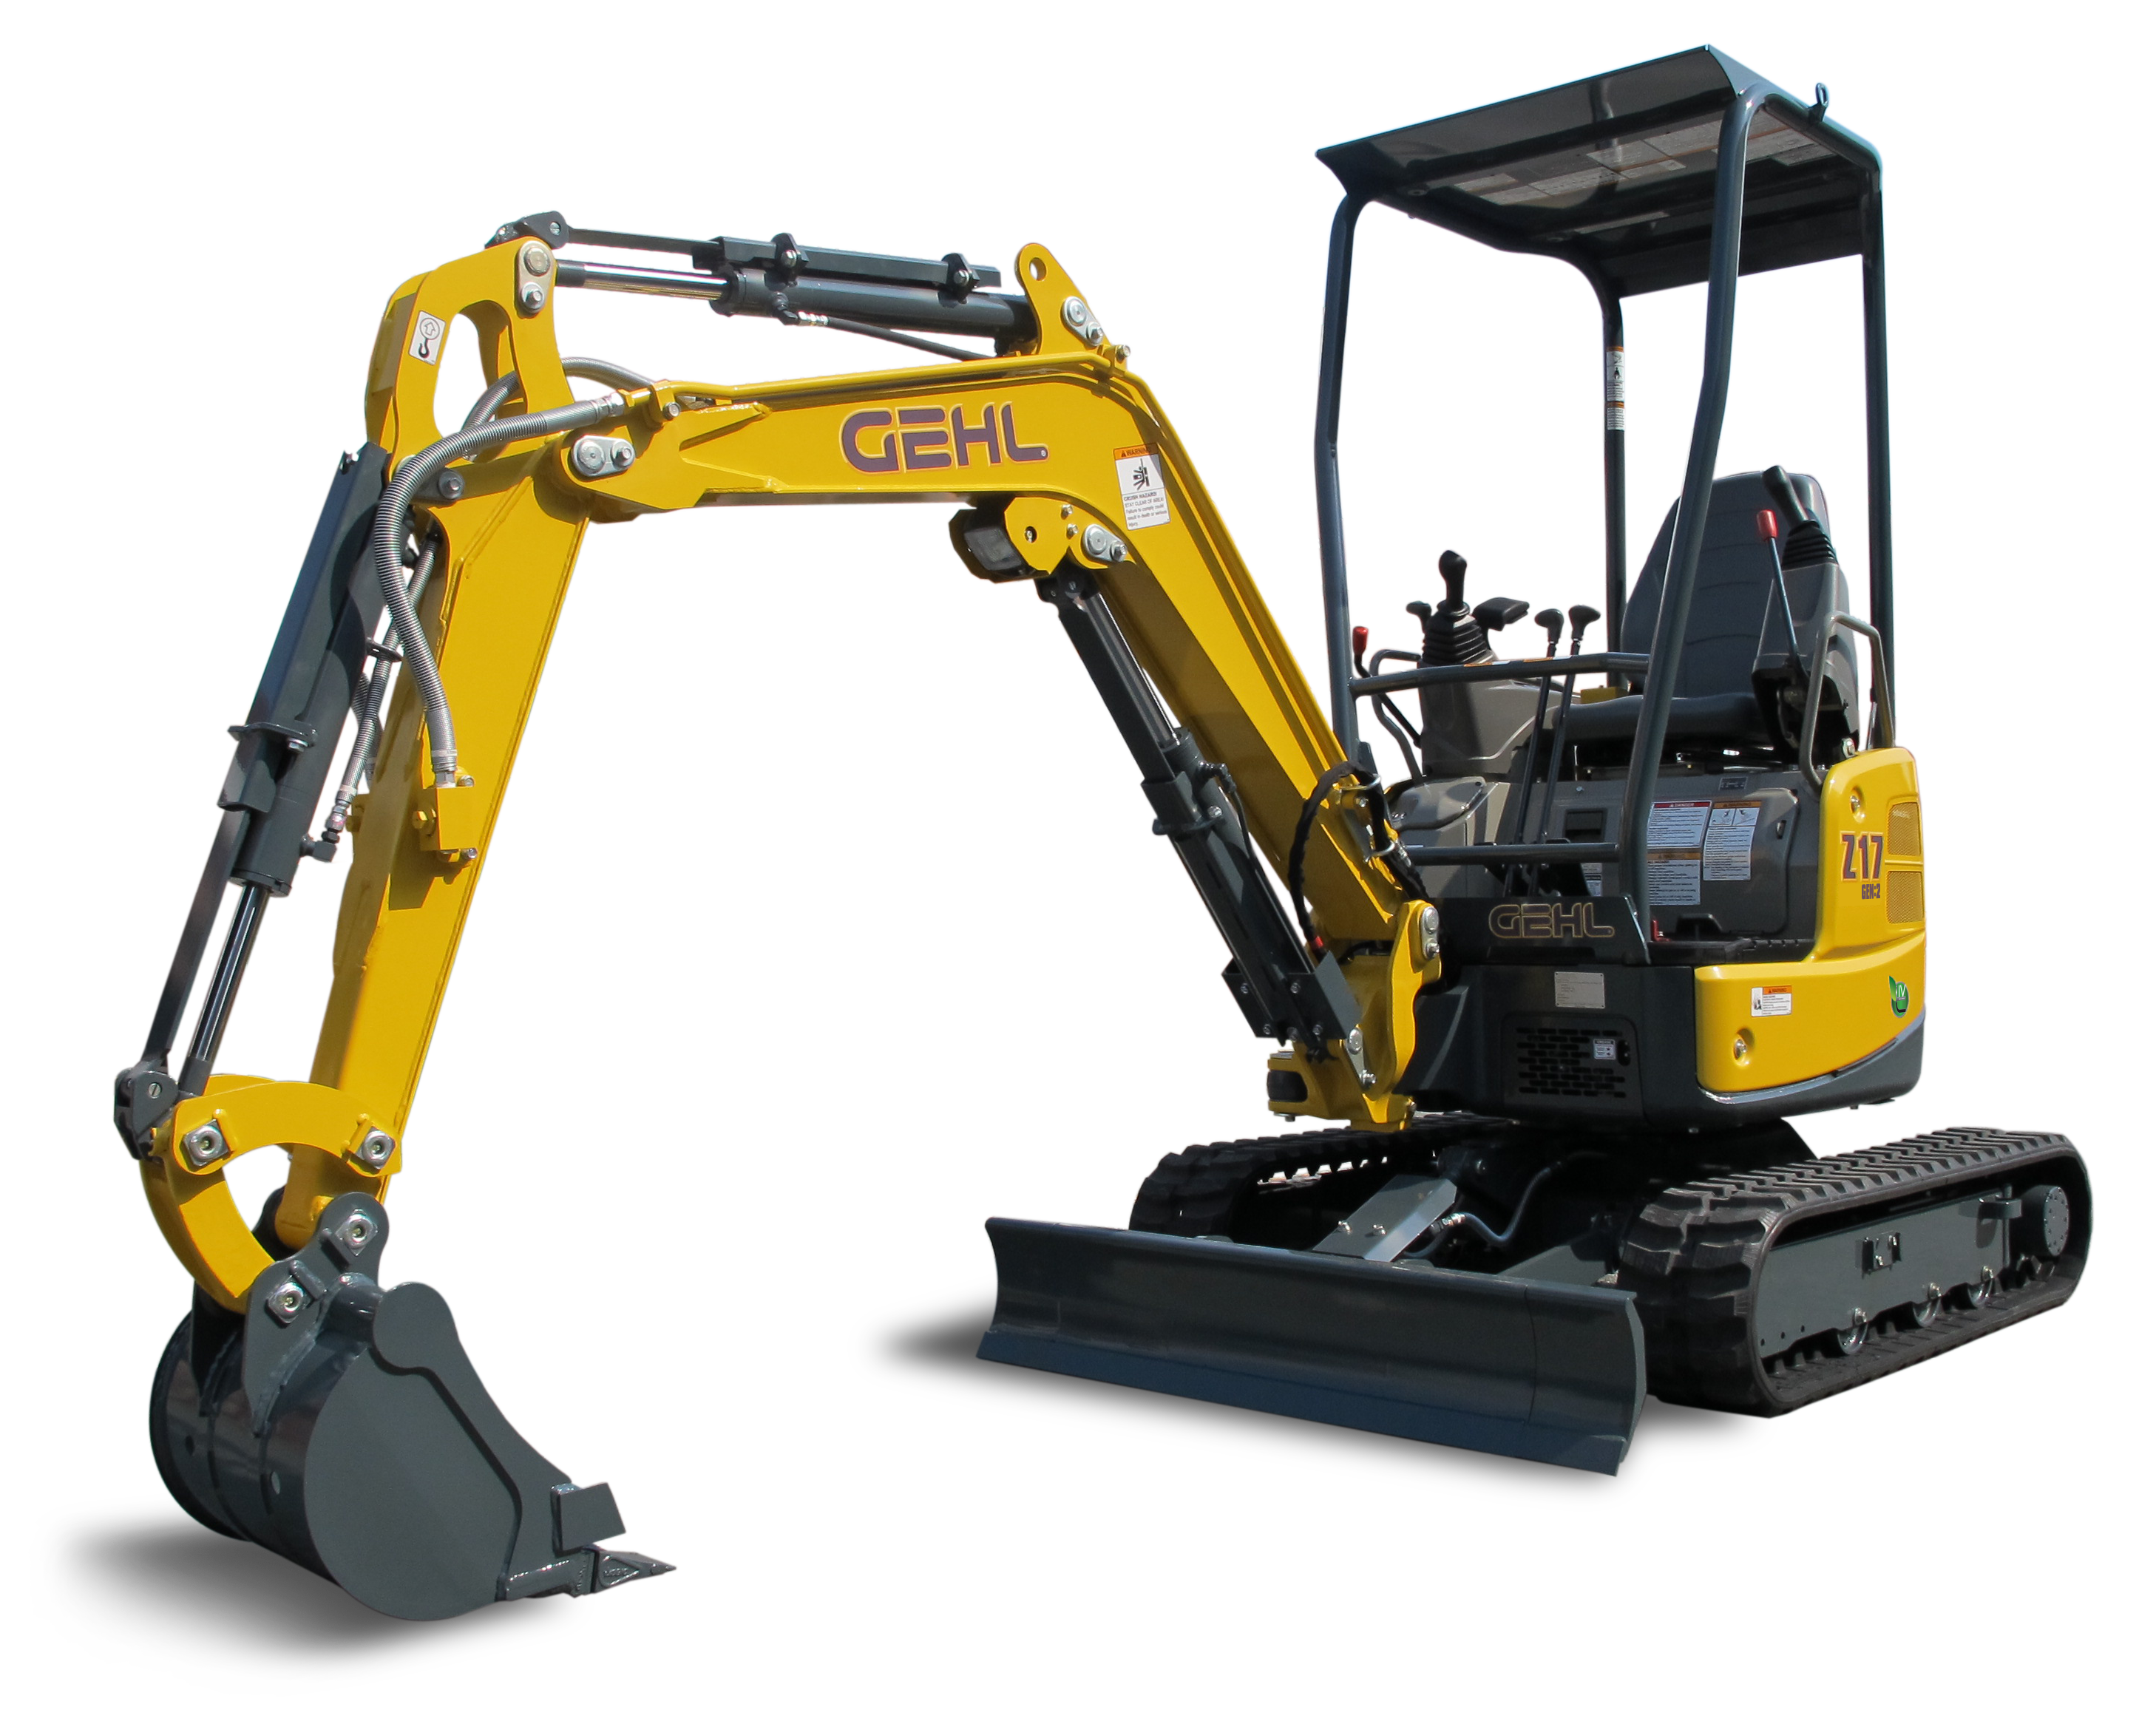 Png images free download. Excavator clipart construction machine